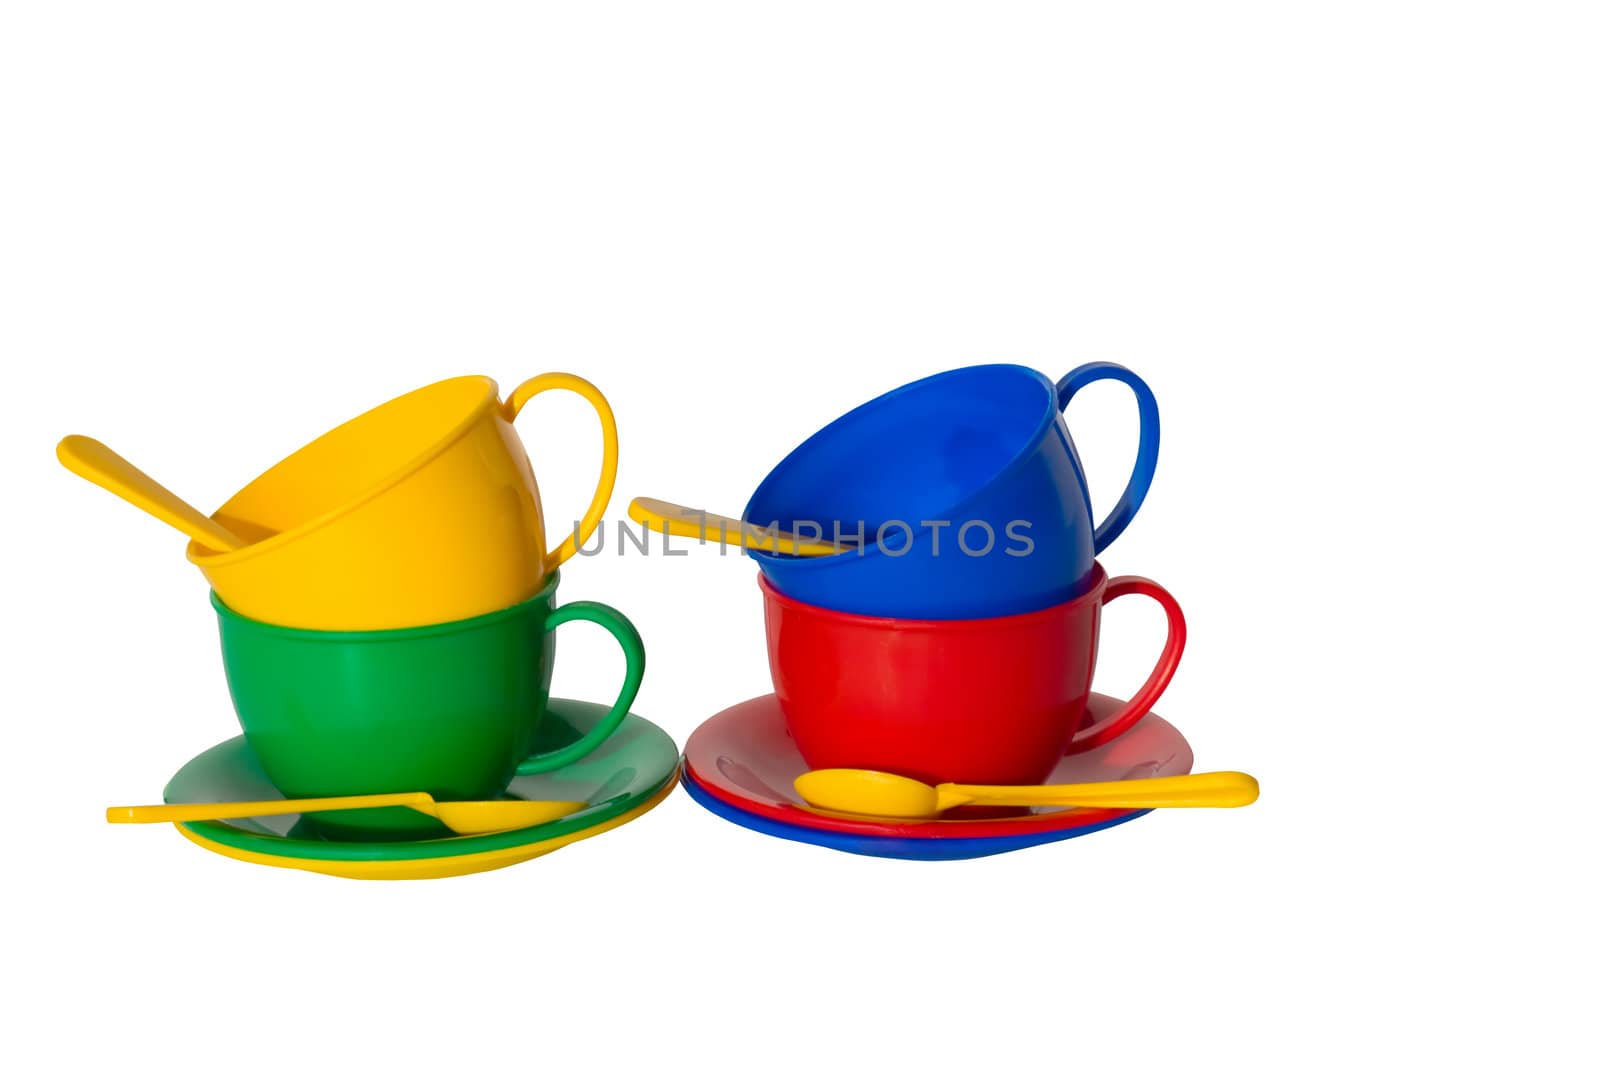 Children's toy dishes, isolated on a white background.